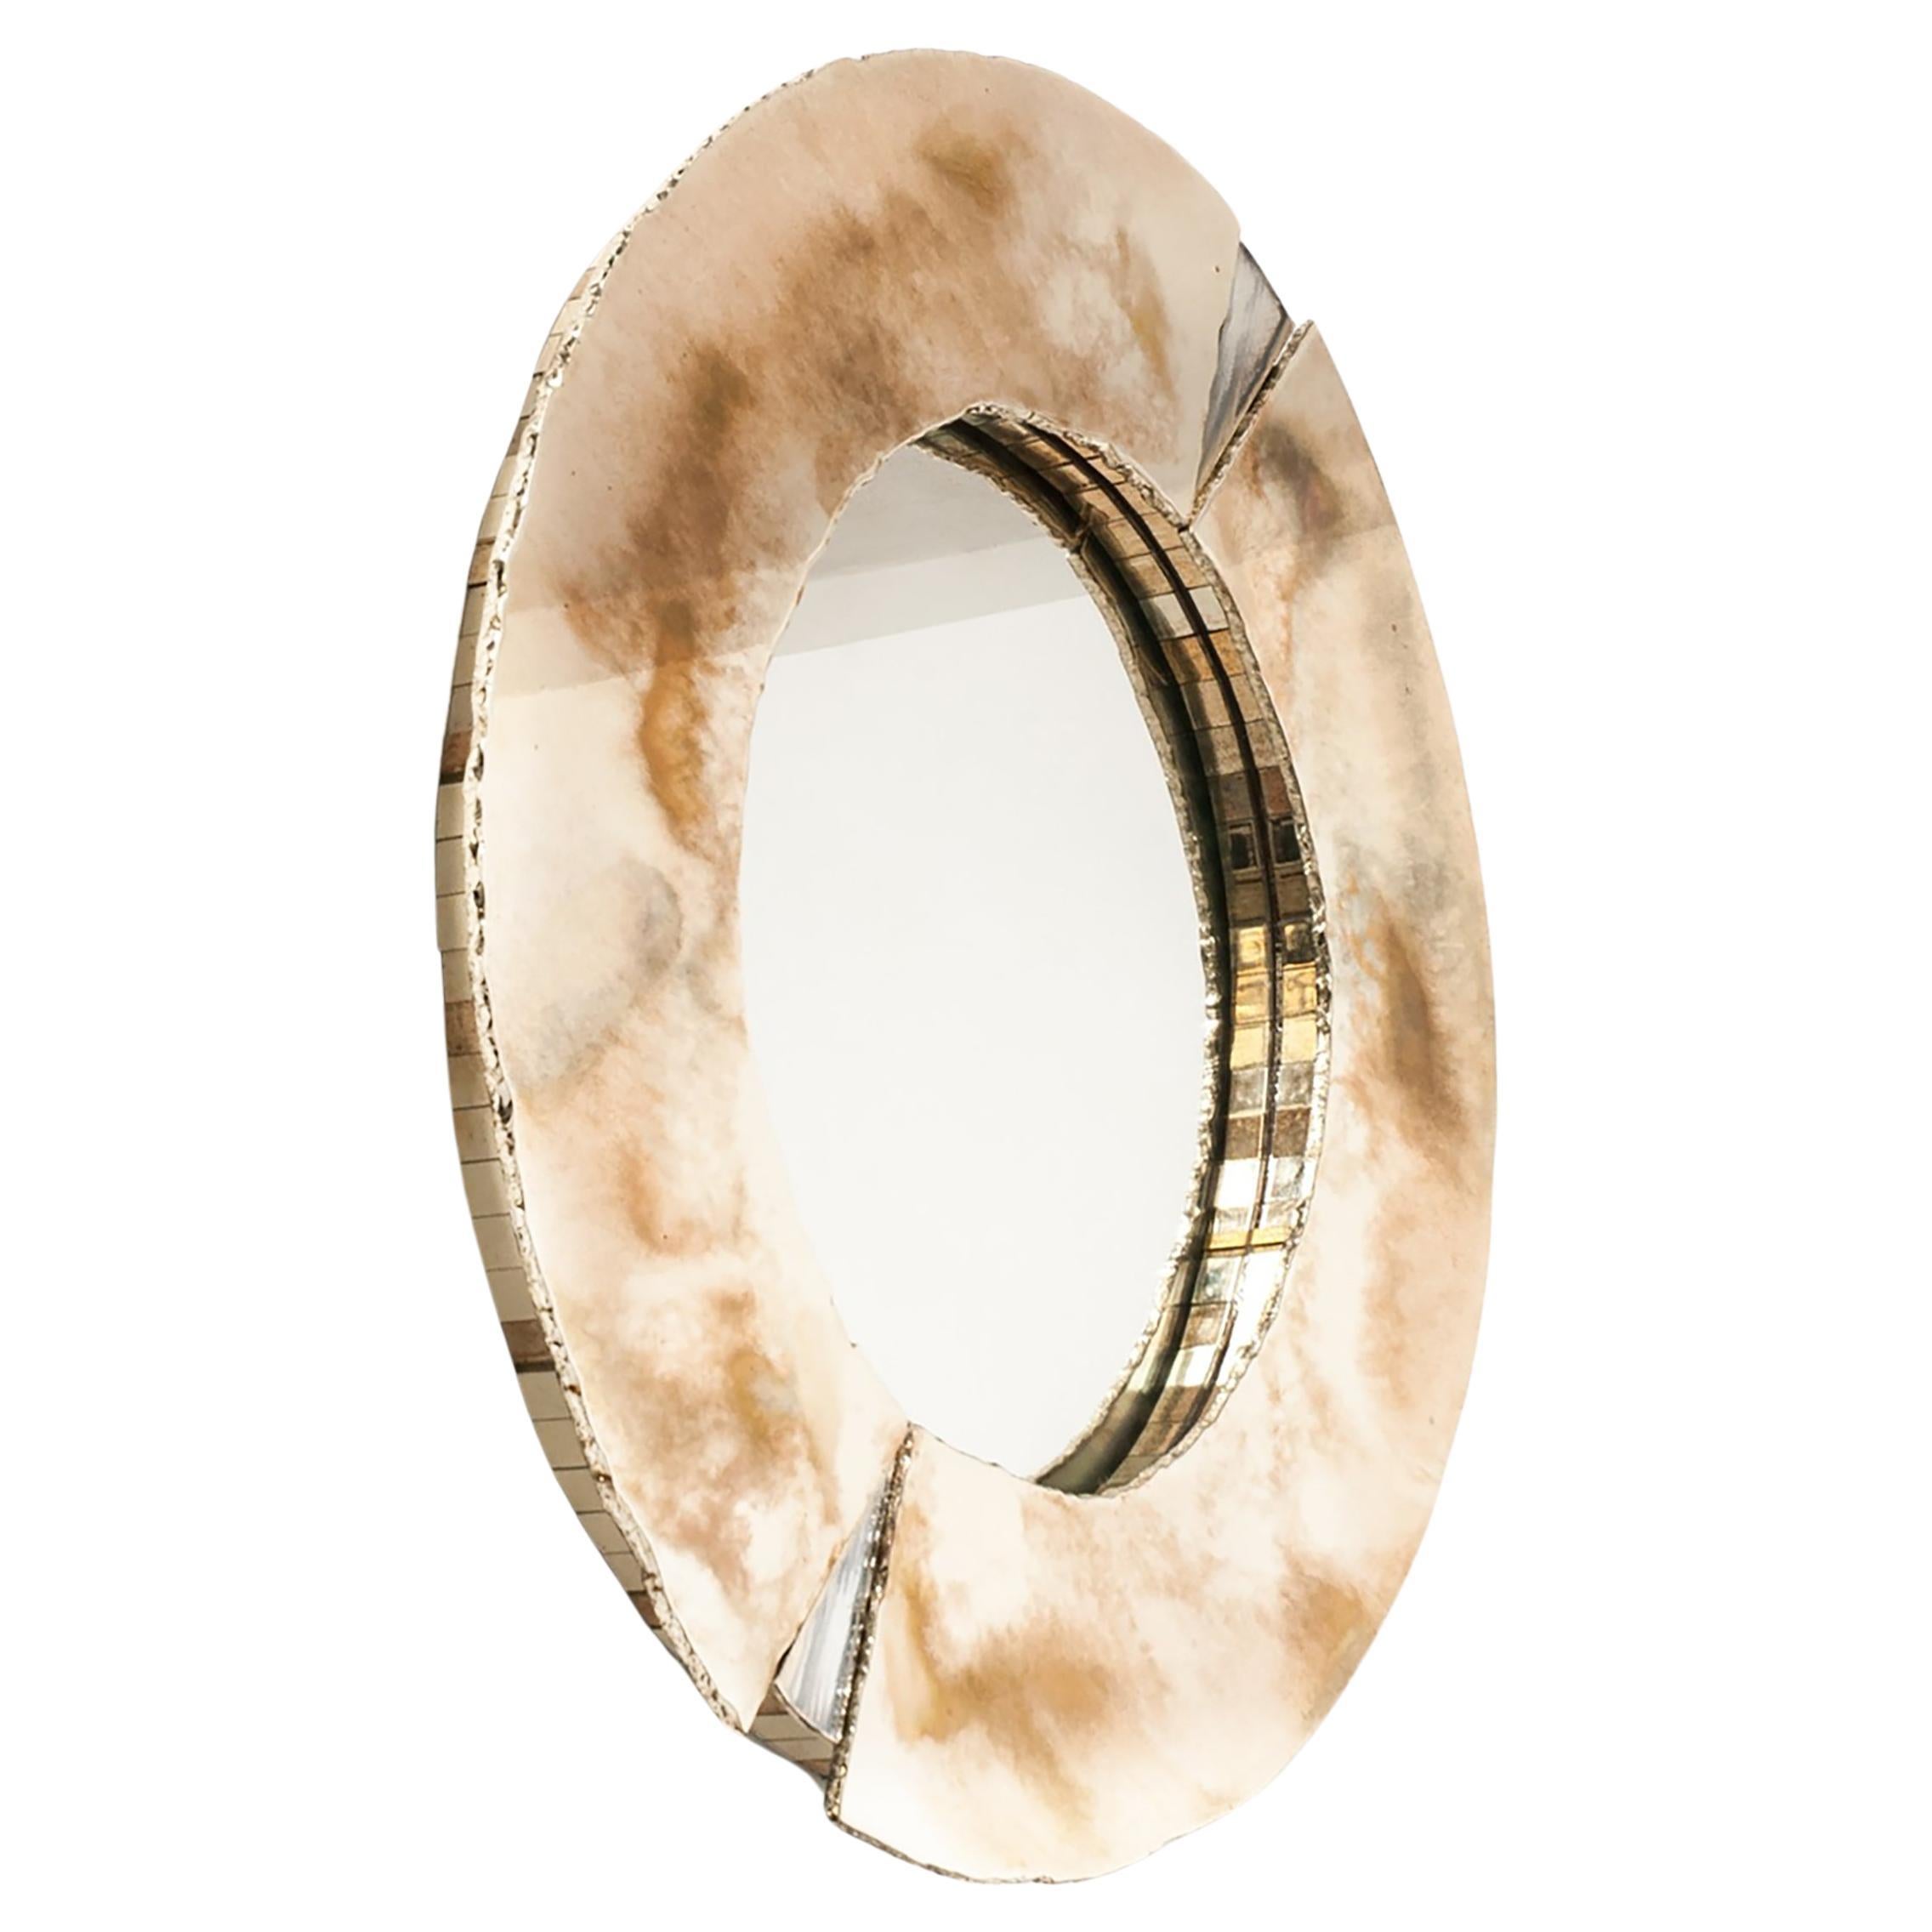 "Iris" Contemporary Mirror, art Silvered Glass Sabrina's silvering, Birch Wood For Sale